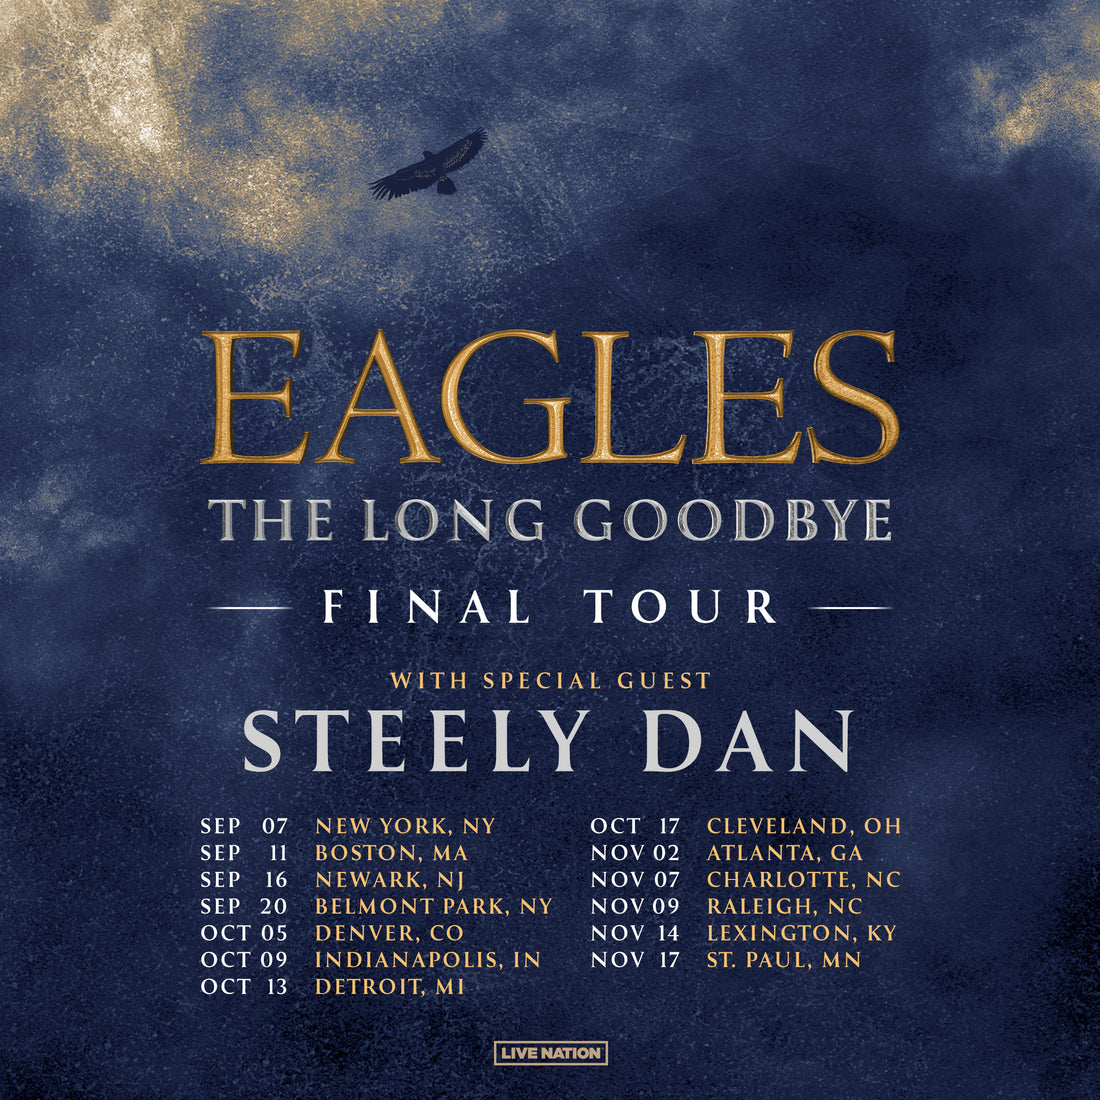 The Eagles Announce “The Long Goodbye” The Band’s Final Tour